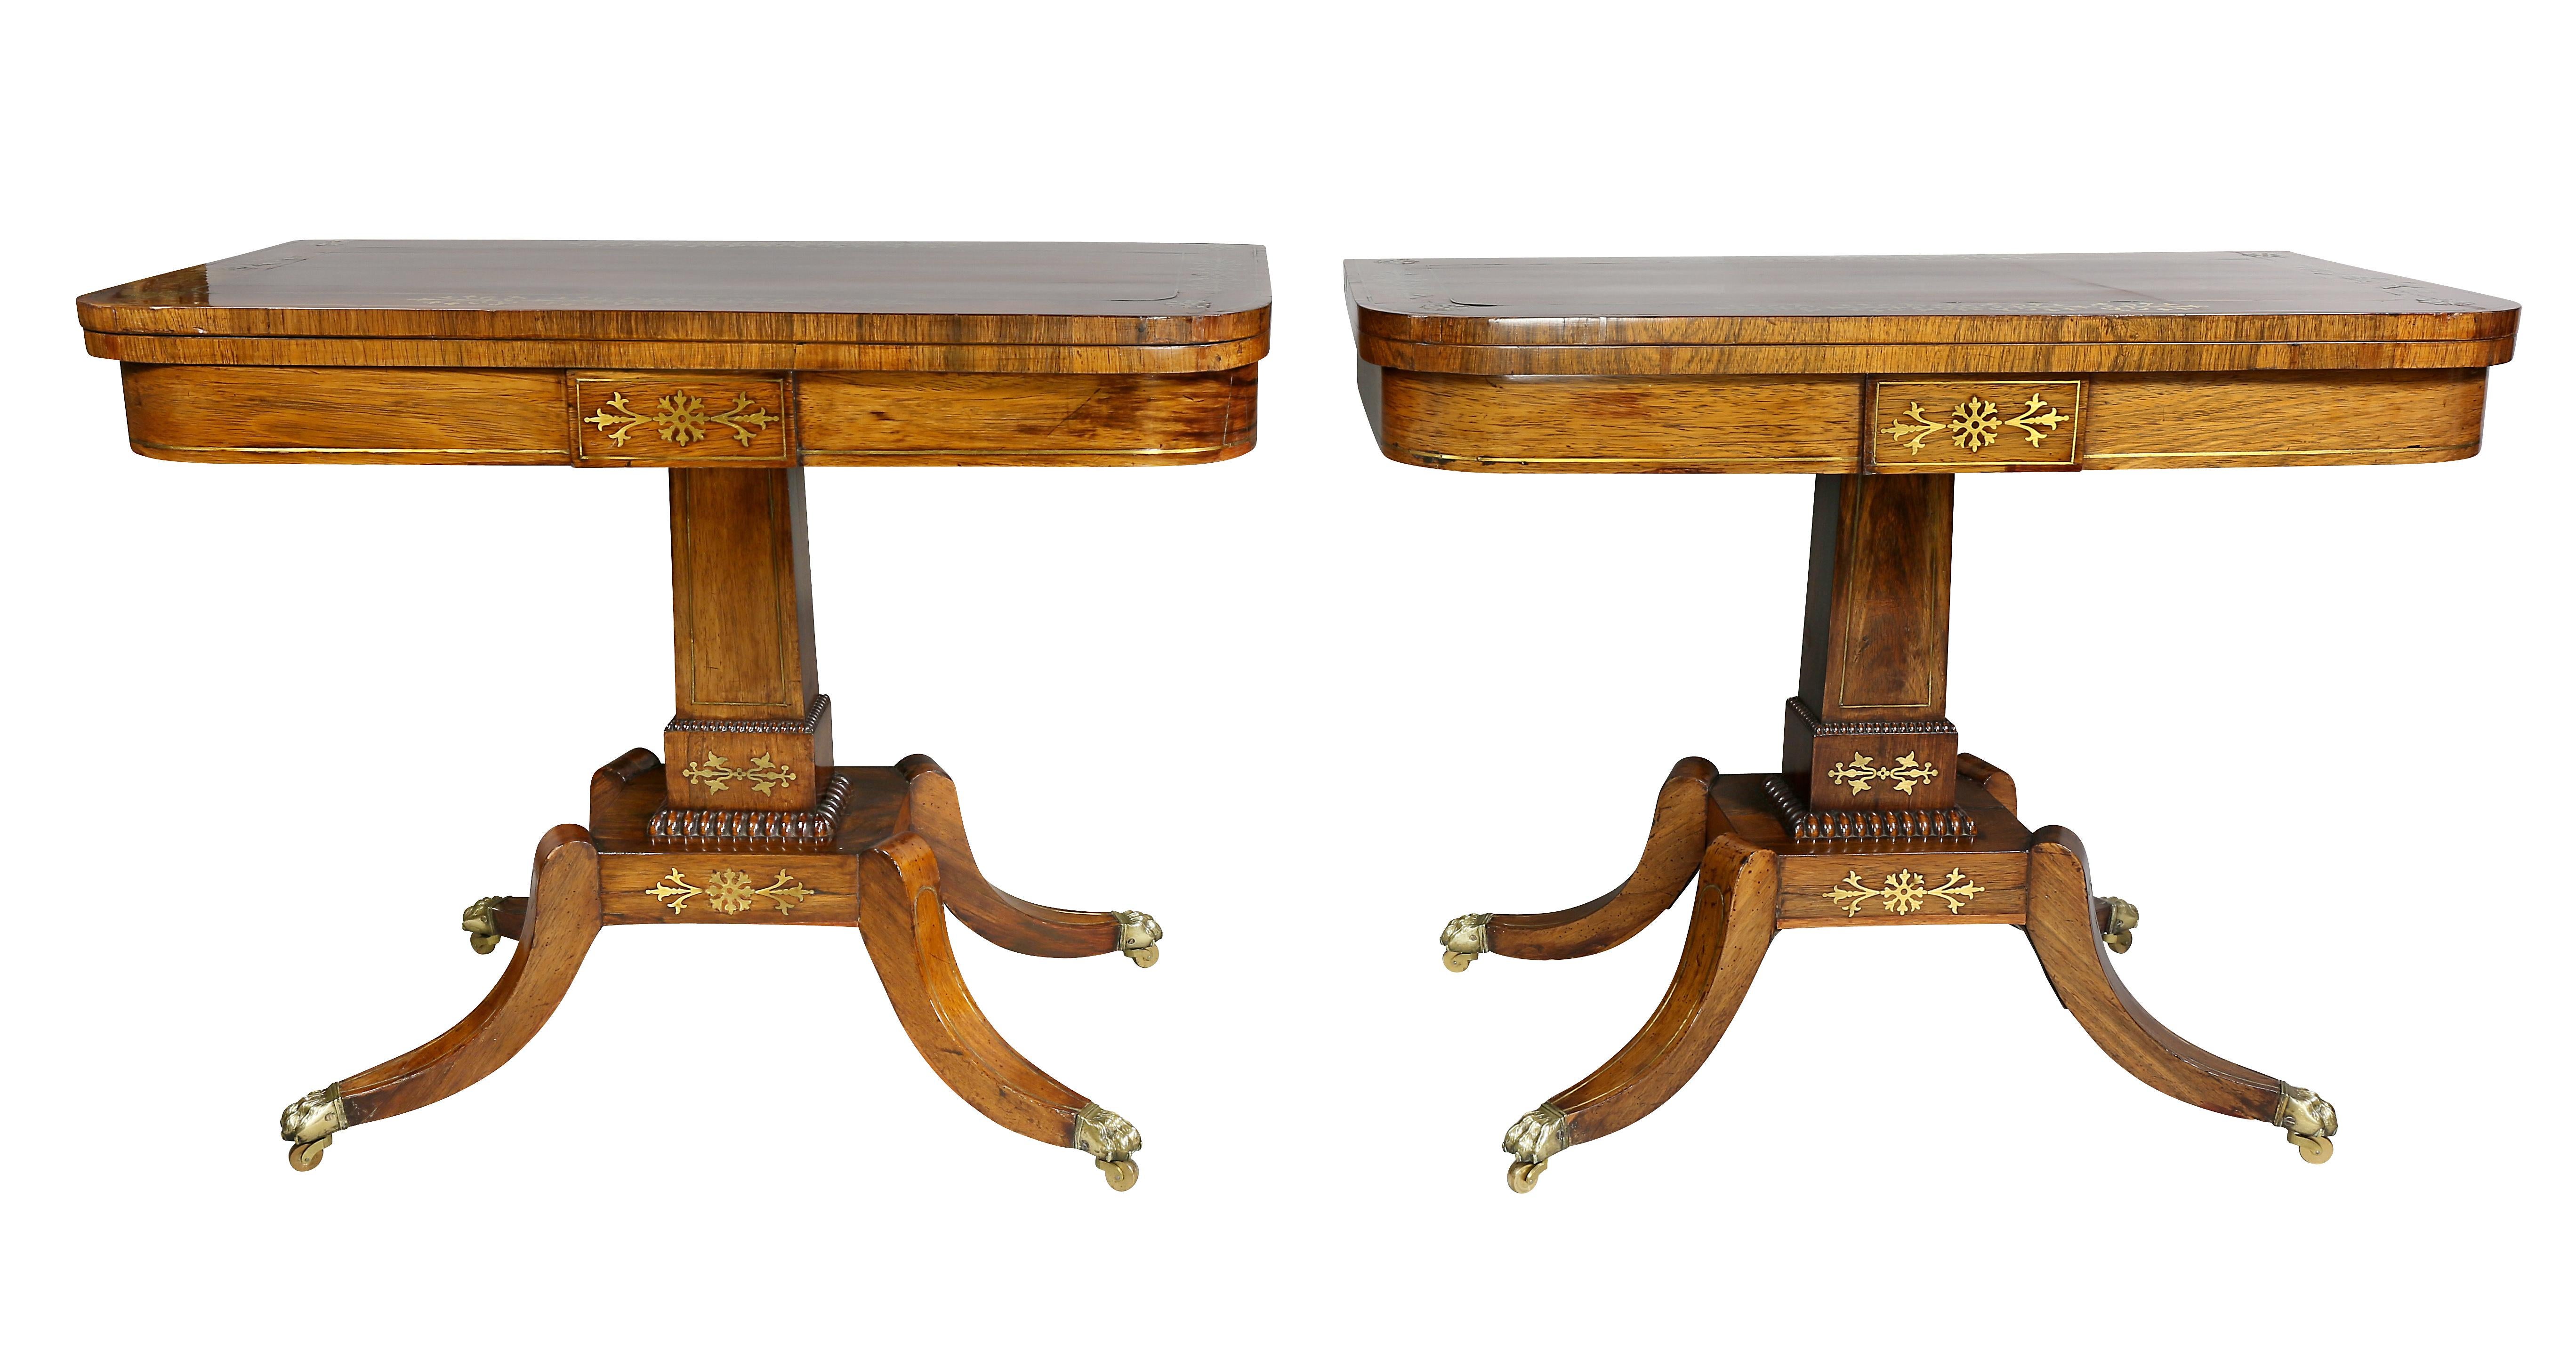 Each with rectangular hinged tops with brass inlaid outer borders, felt lined playing surface raised on a square form supports, beaded carving and four saber legs with brass inlay ending on casters.